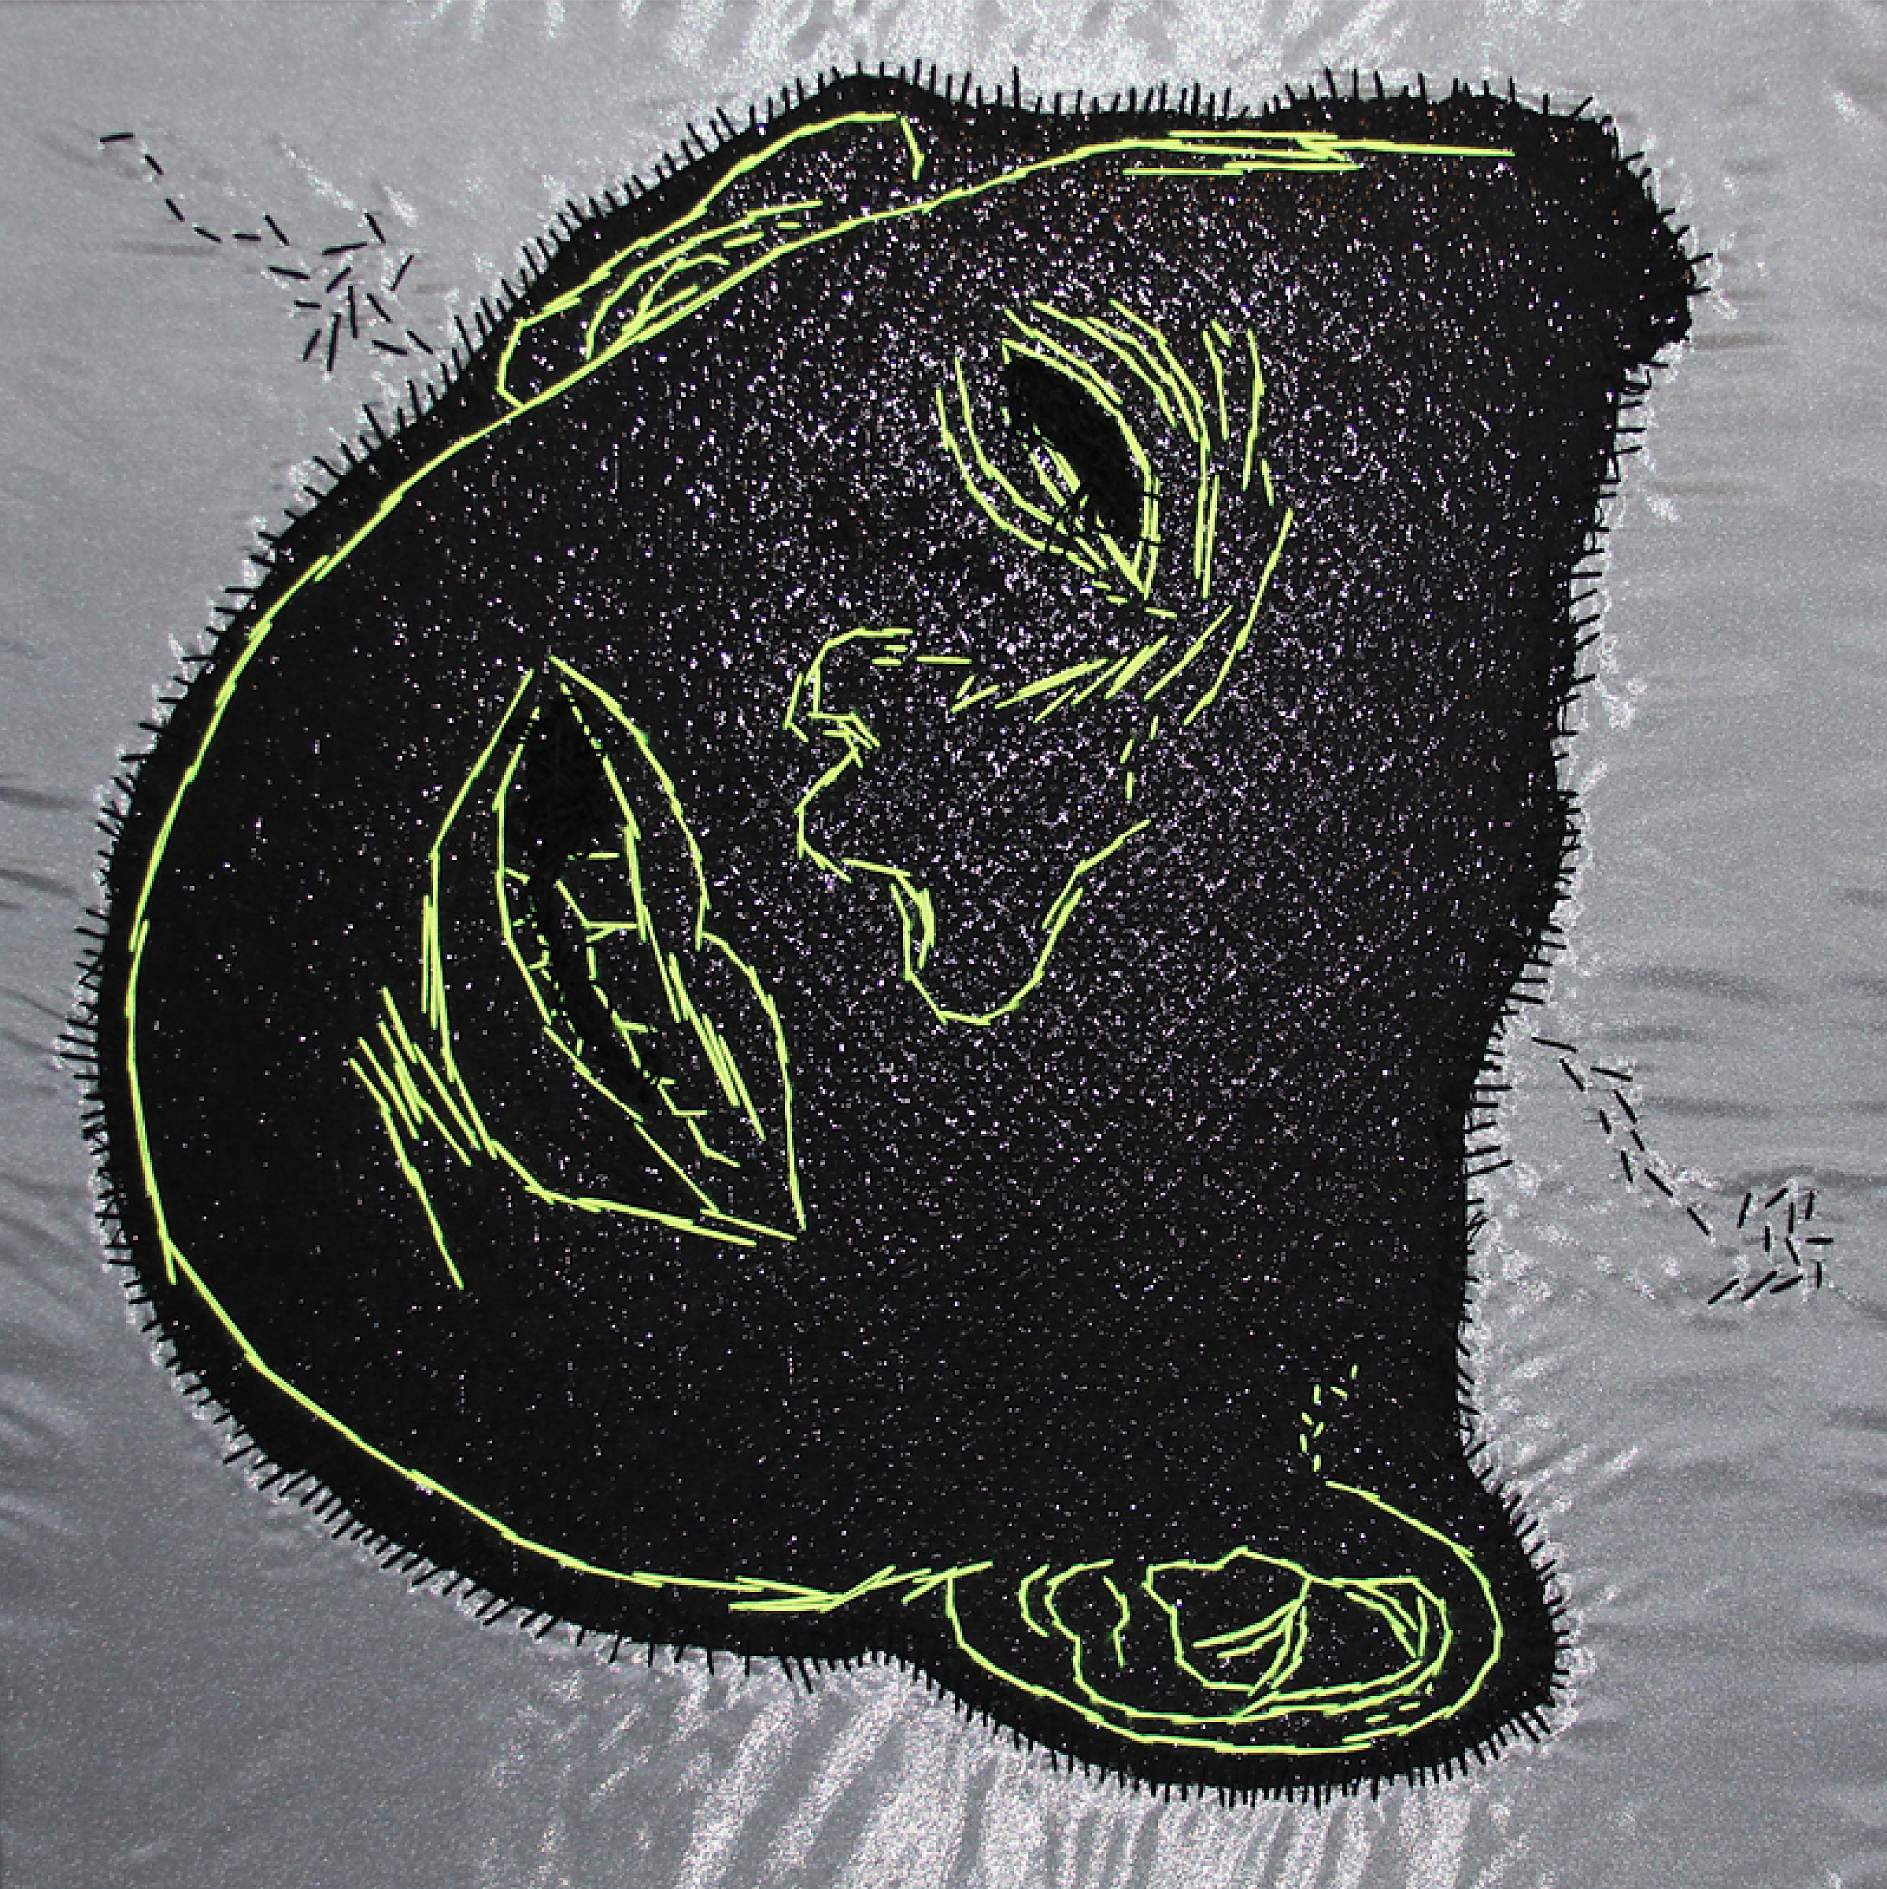 2011, Embroidery, sewing, canvas, threads, 100 x 100 cm